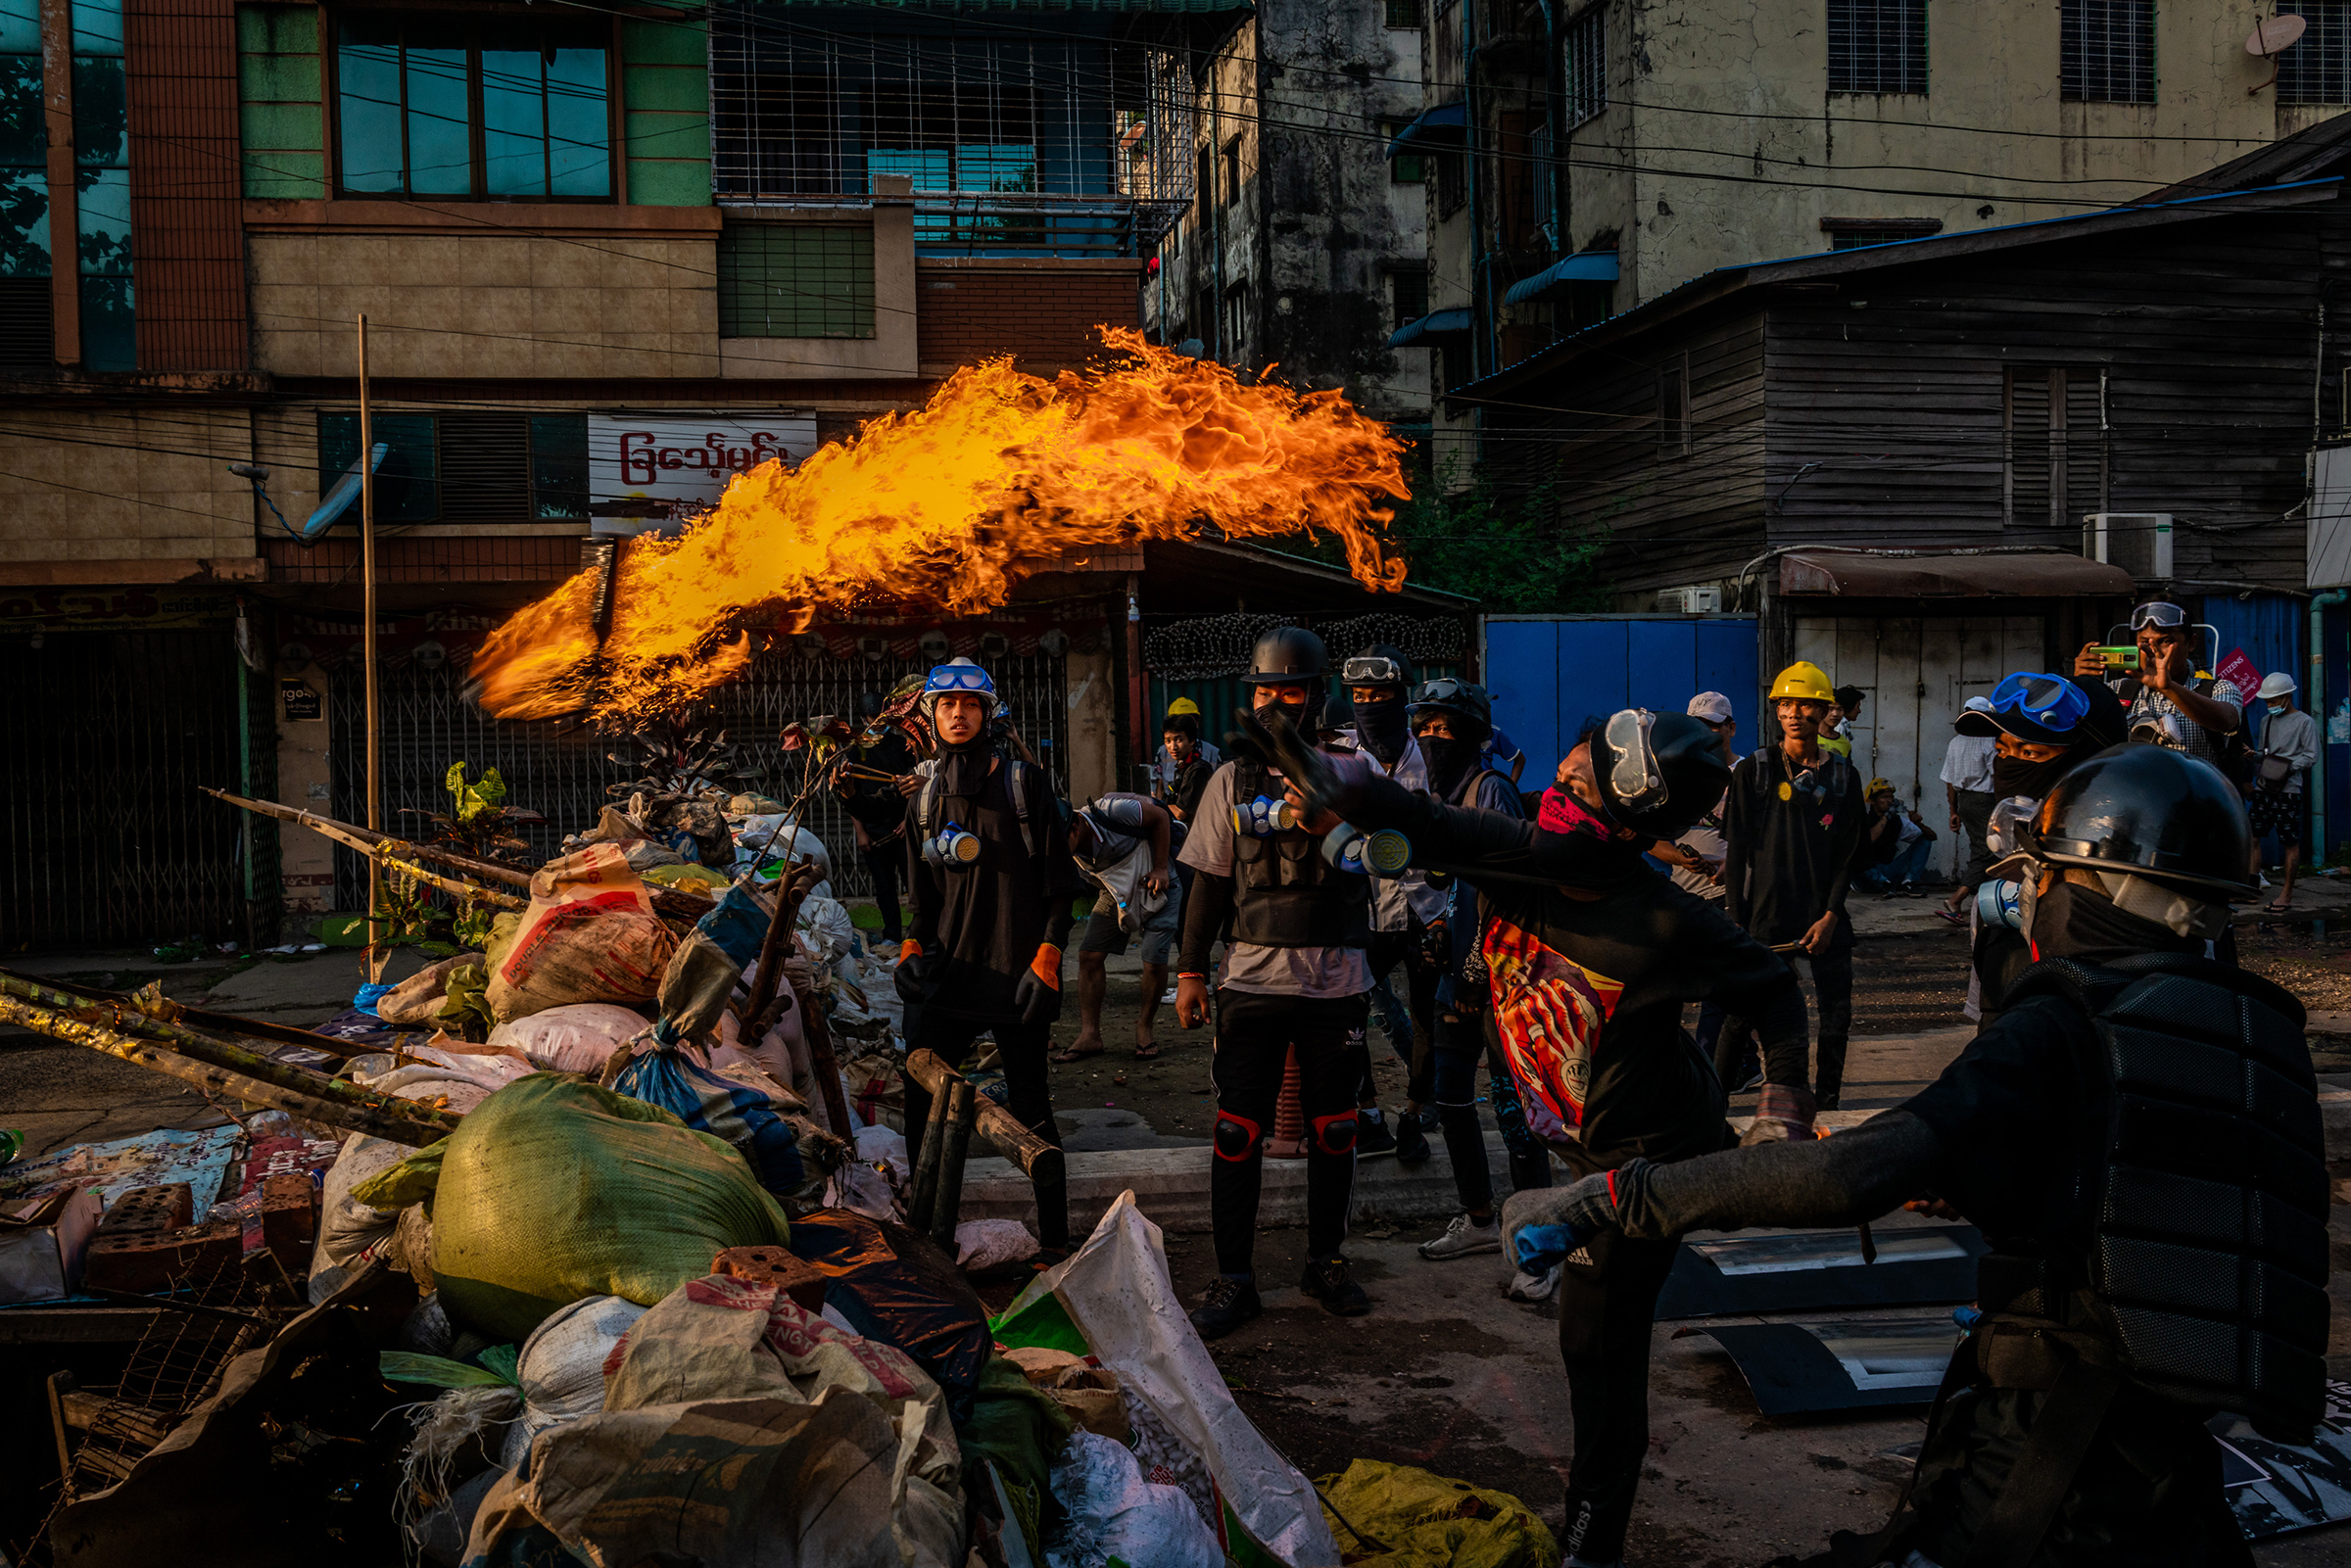 After Myanmar’s military deposed an elected government, protesters launched the “Spring Revolution”—and, on March 16 in Yangon, this firebomb.